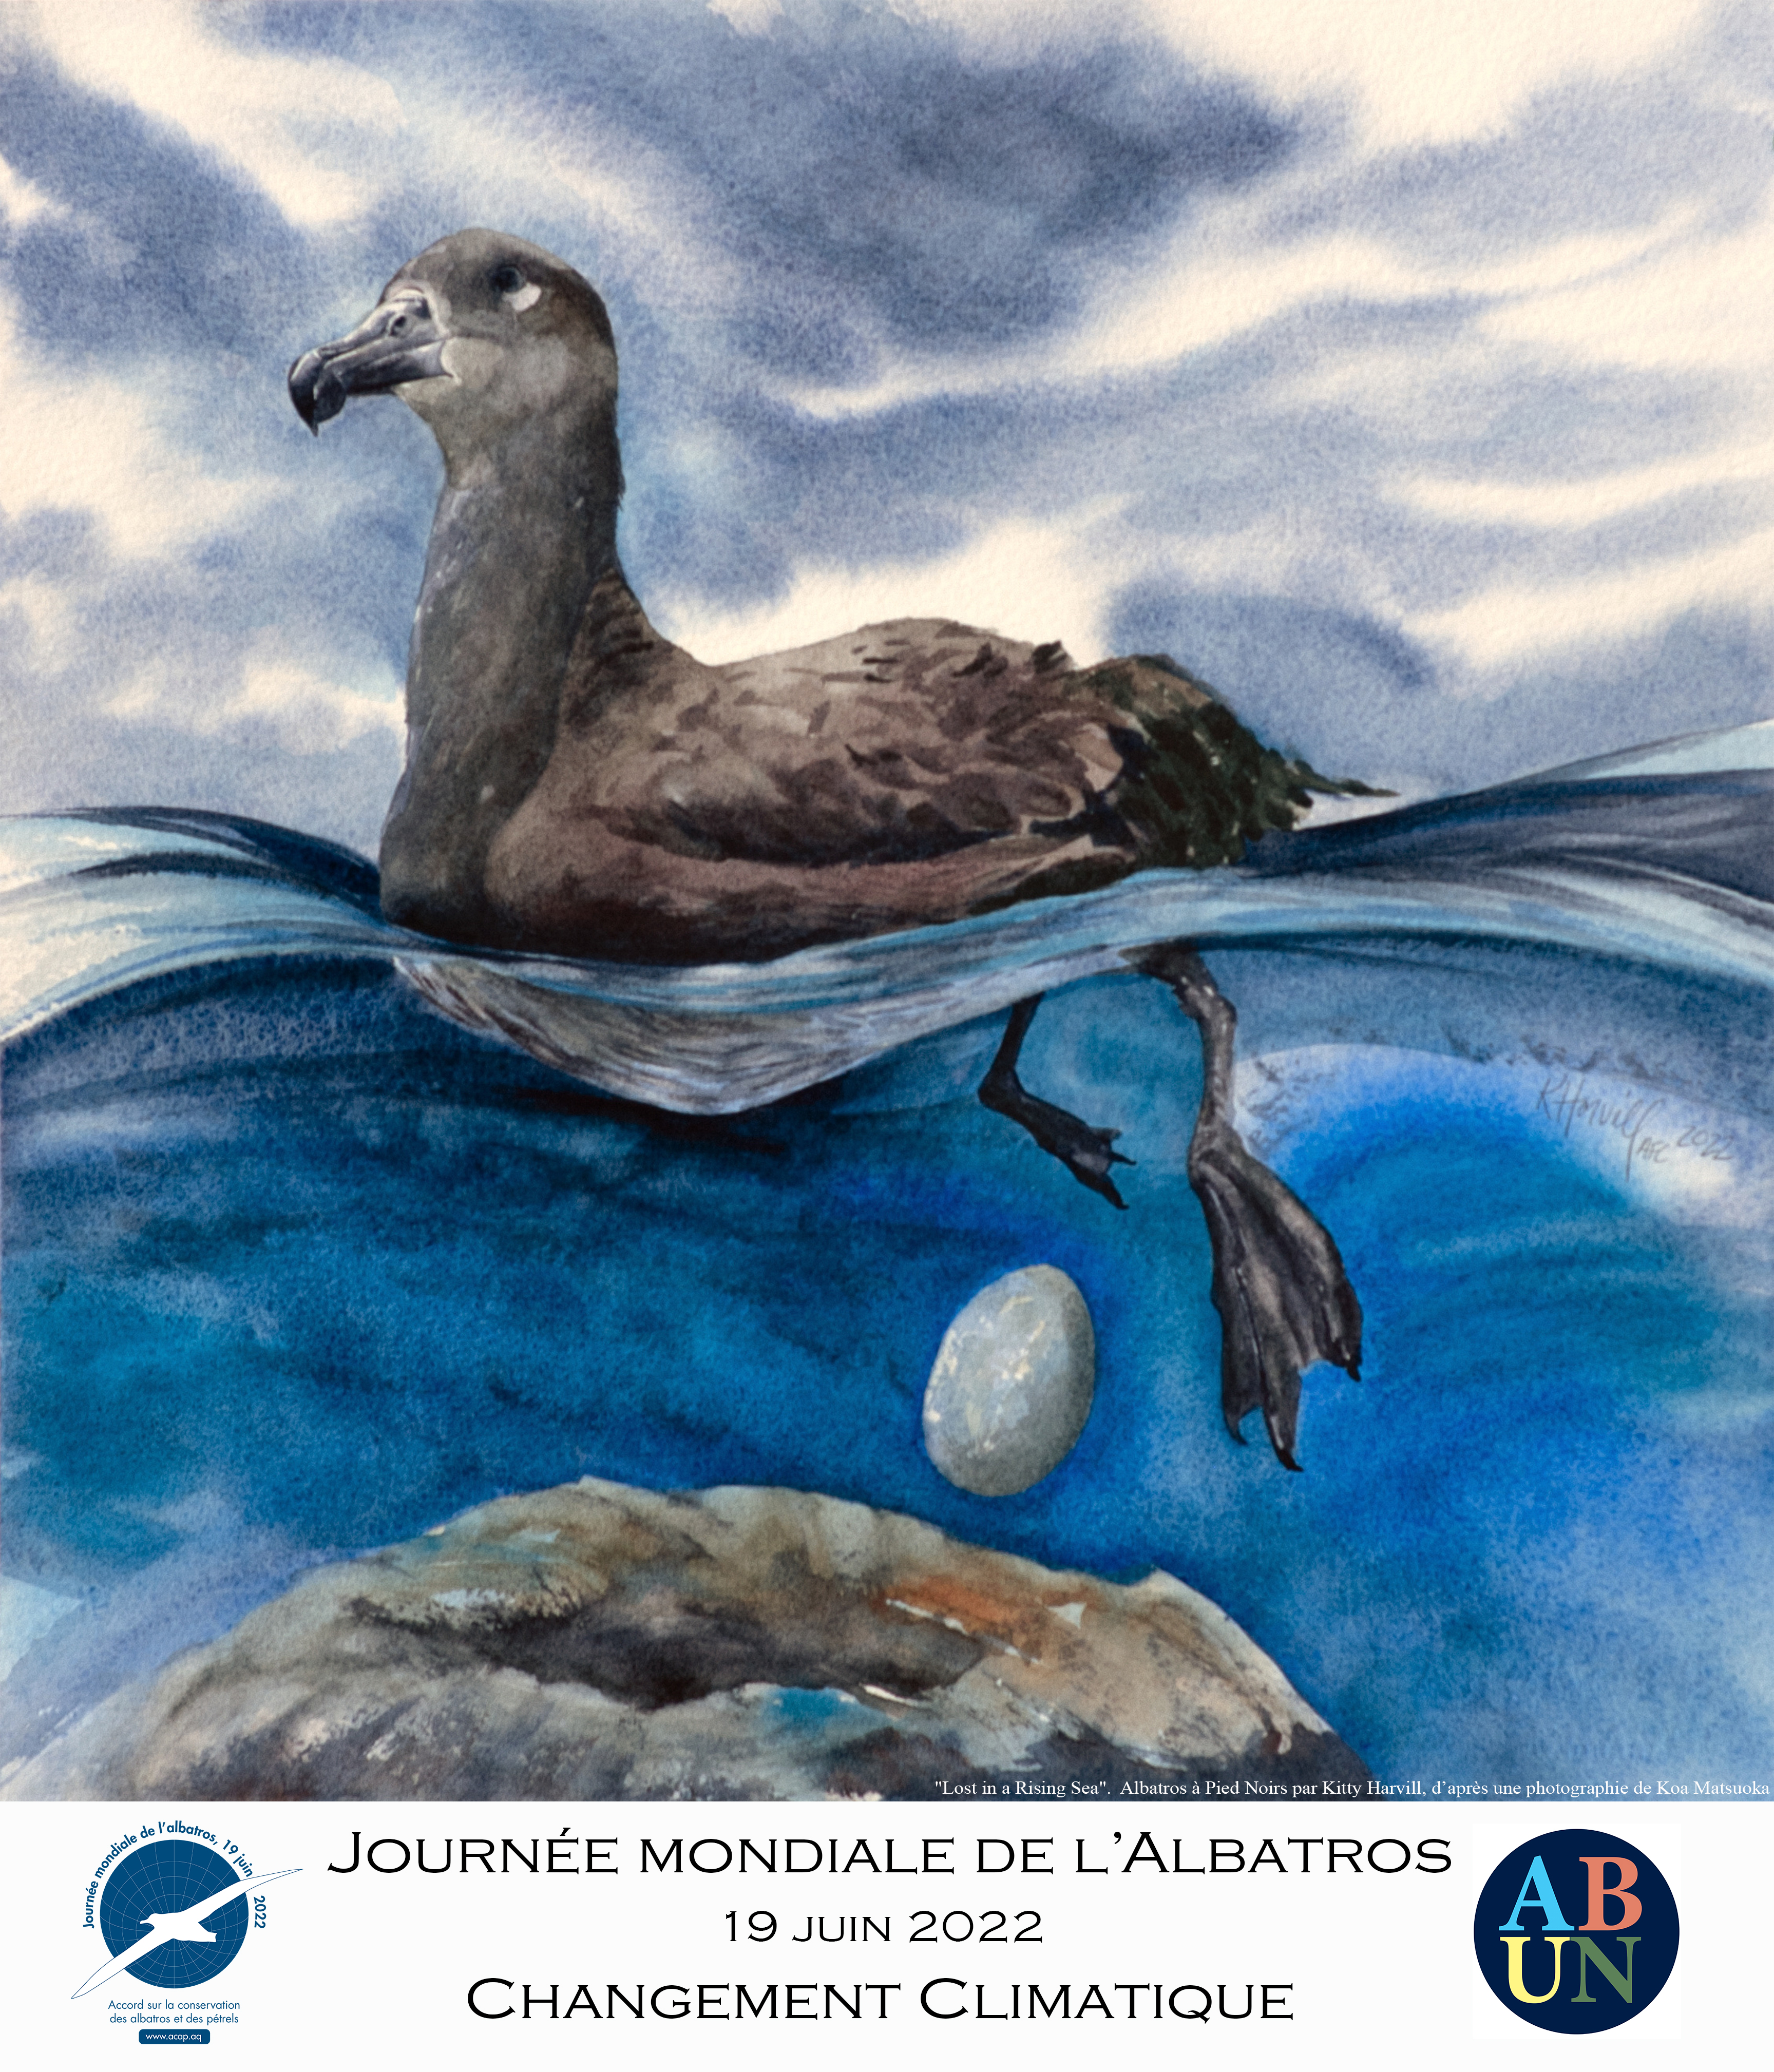 Fr Lost in a Rising Sea Black footed Albatross by Kitty Harvill after a photograph by Koa Matsuoka French